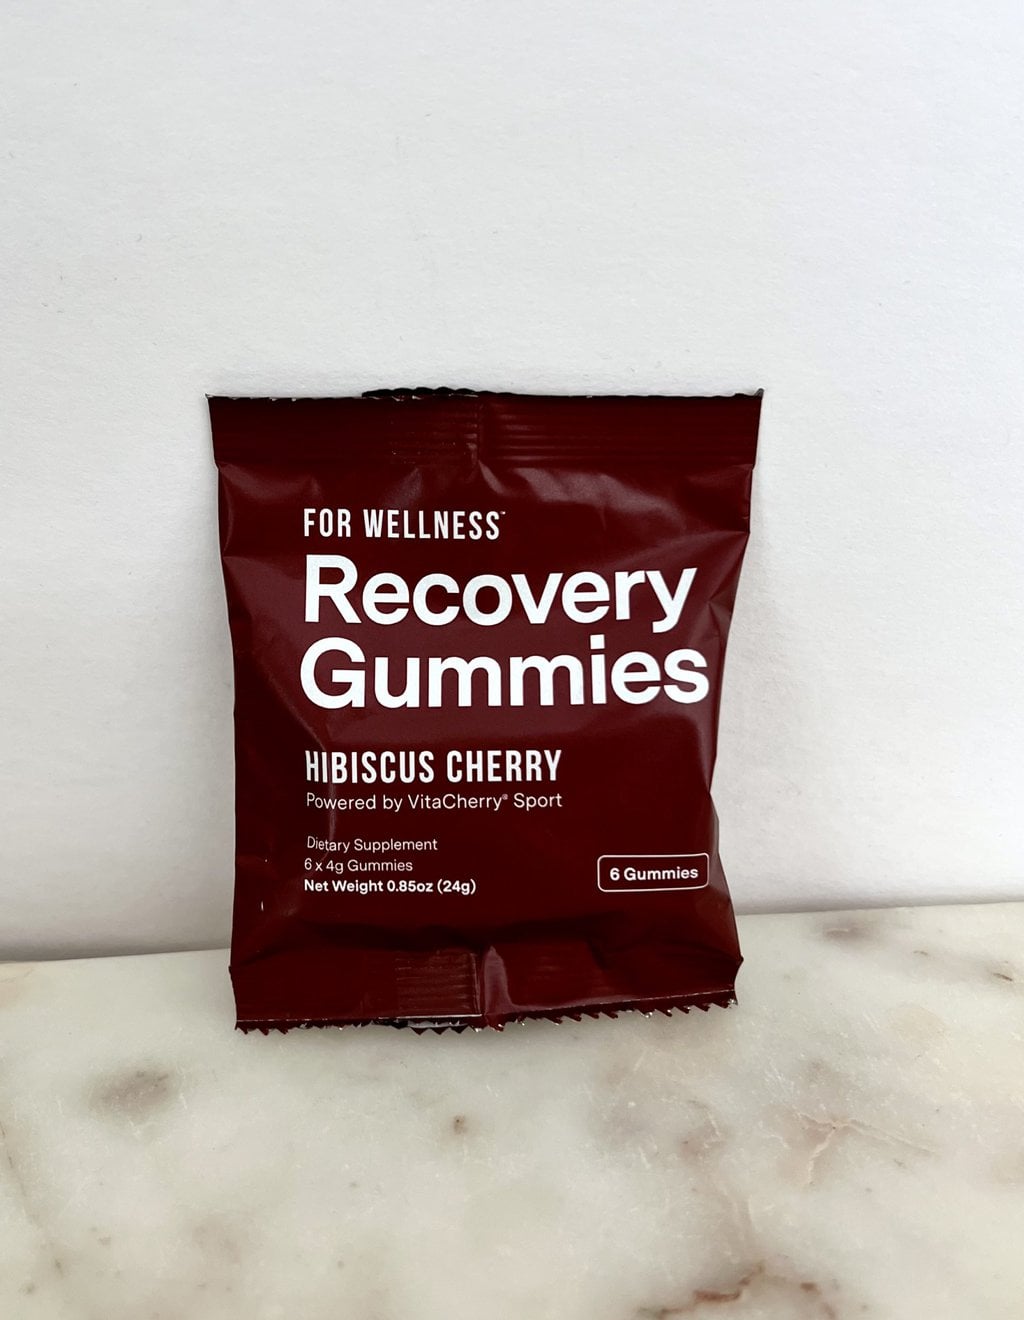 For Wellness Recovery Gummies